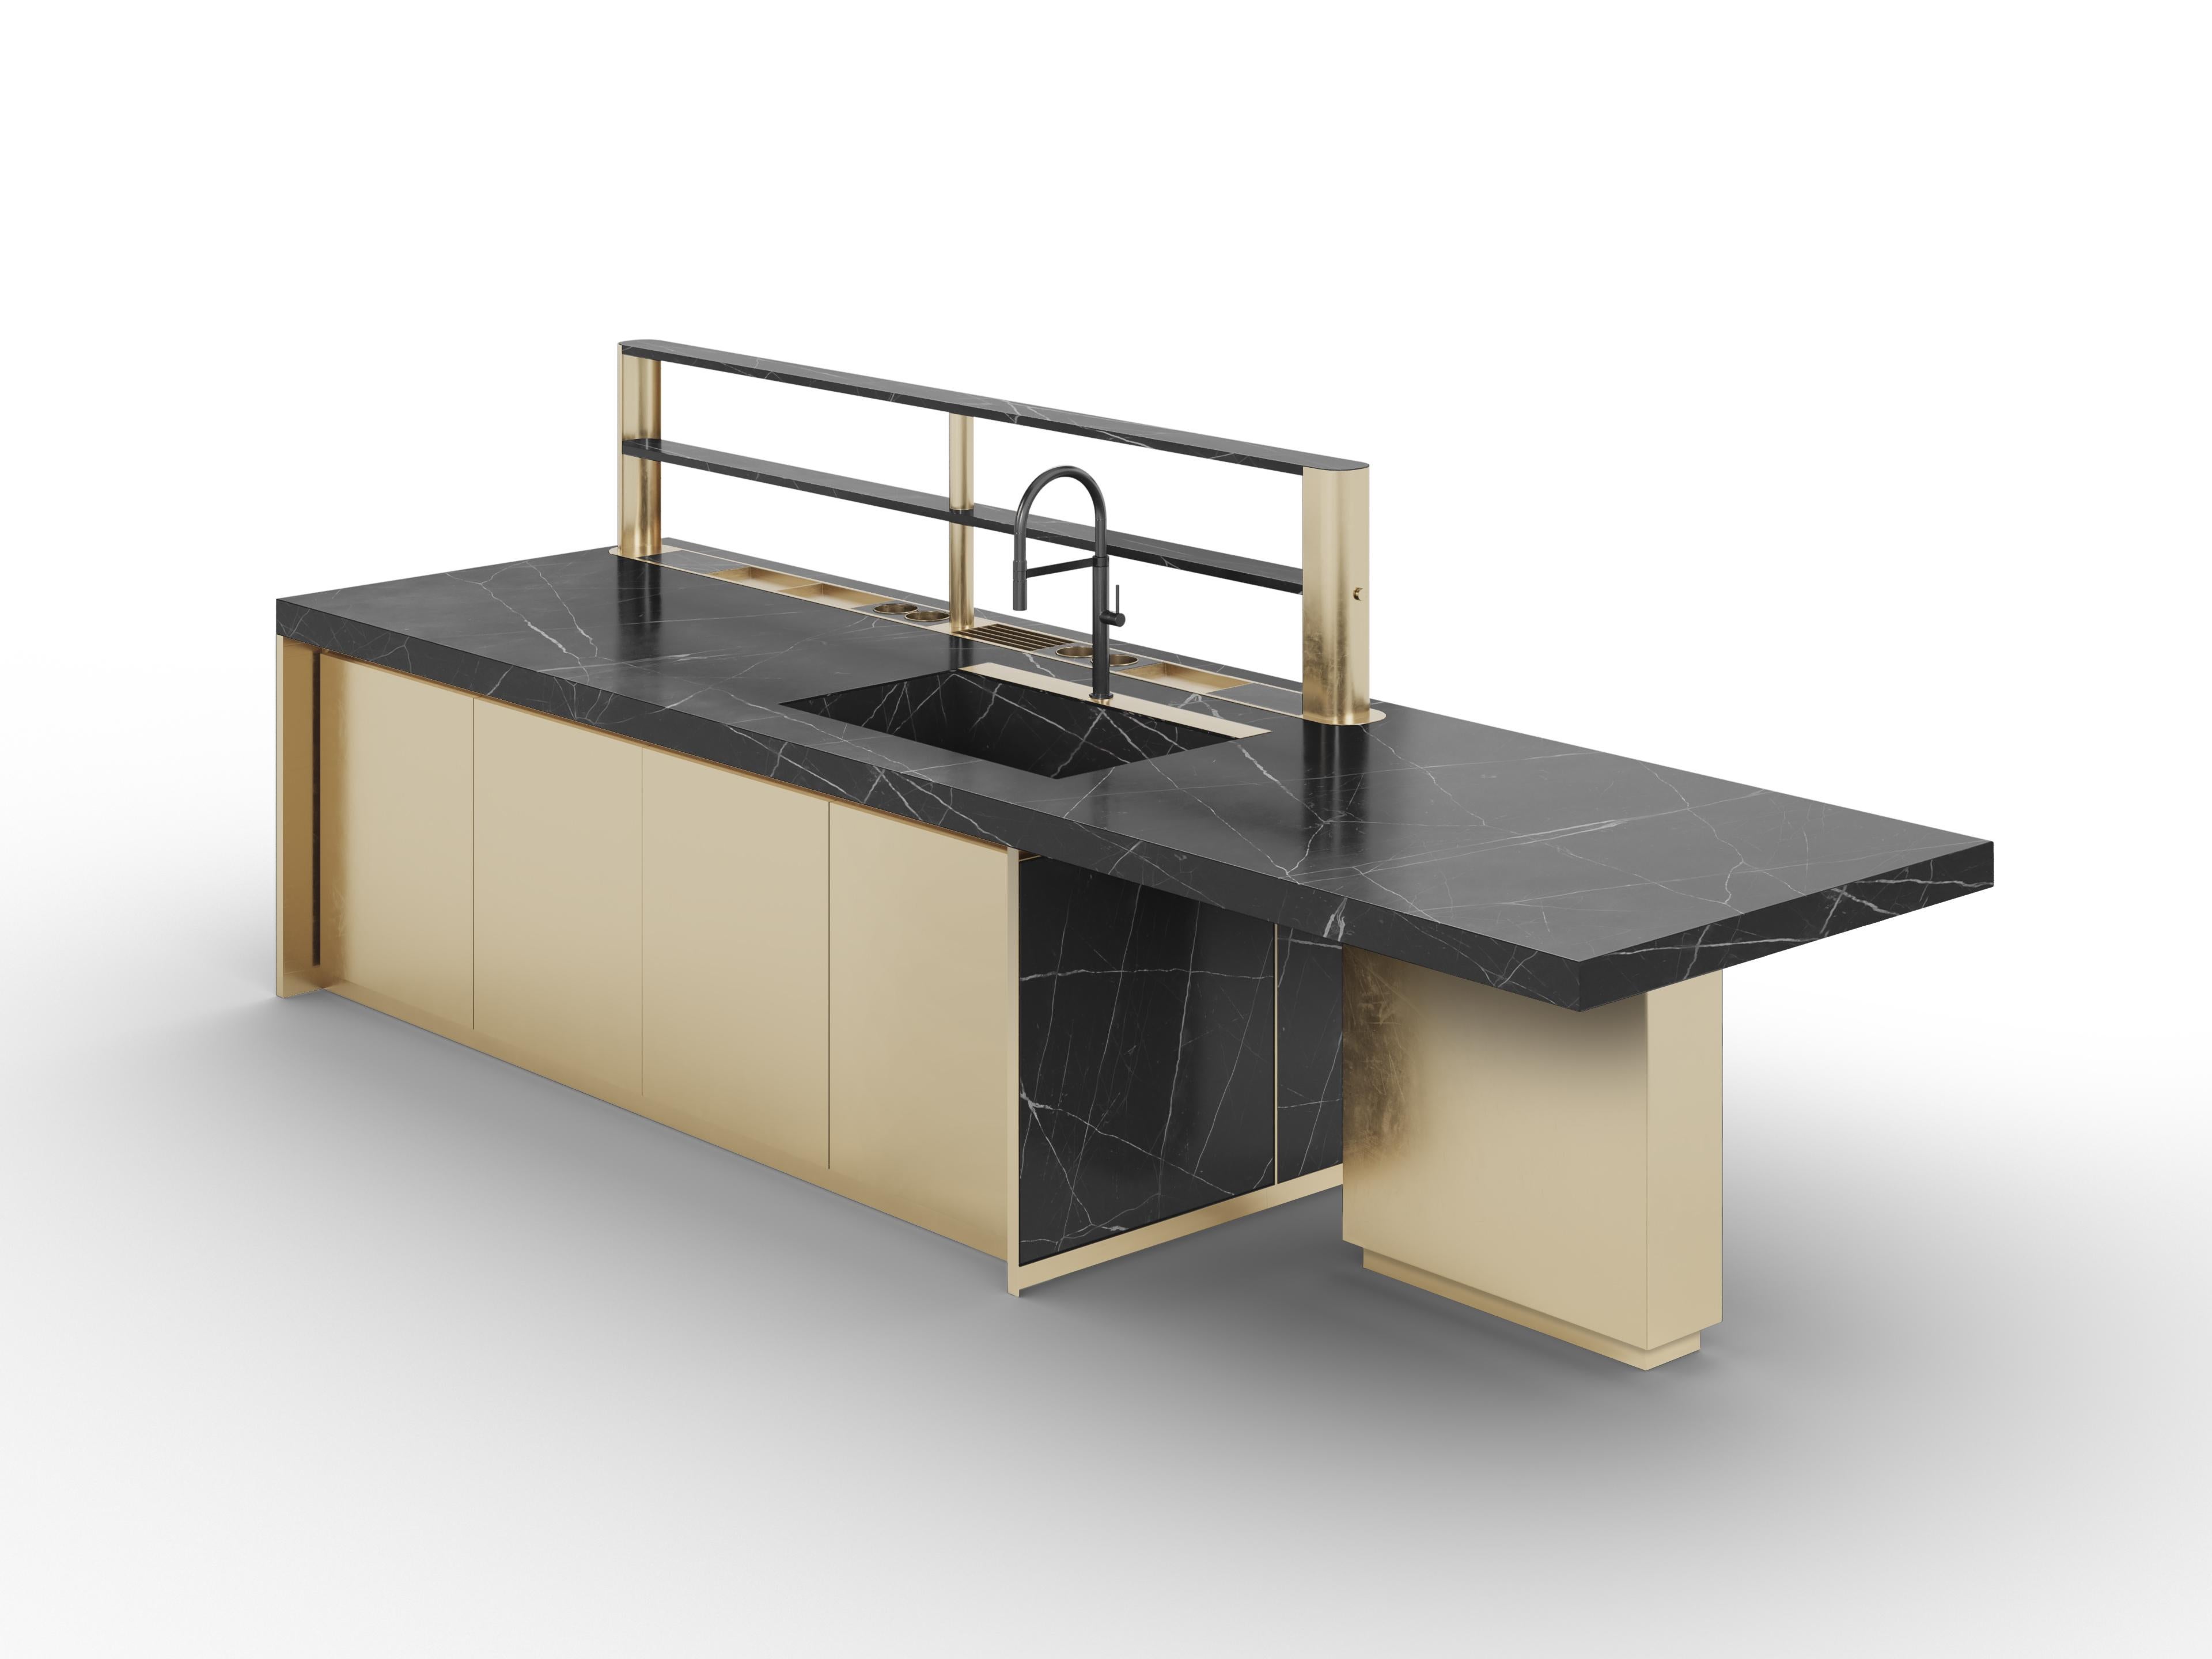 Contemporary Golden and Emperador Marble Outdoor Kitchen with doors and extension For Sale